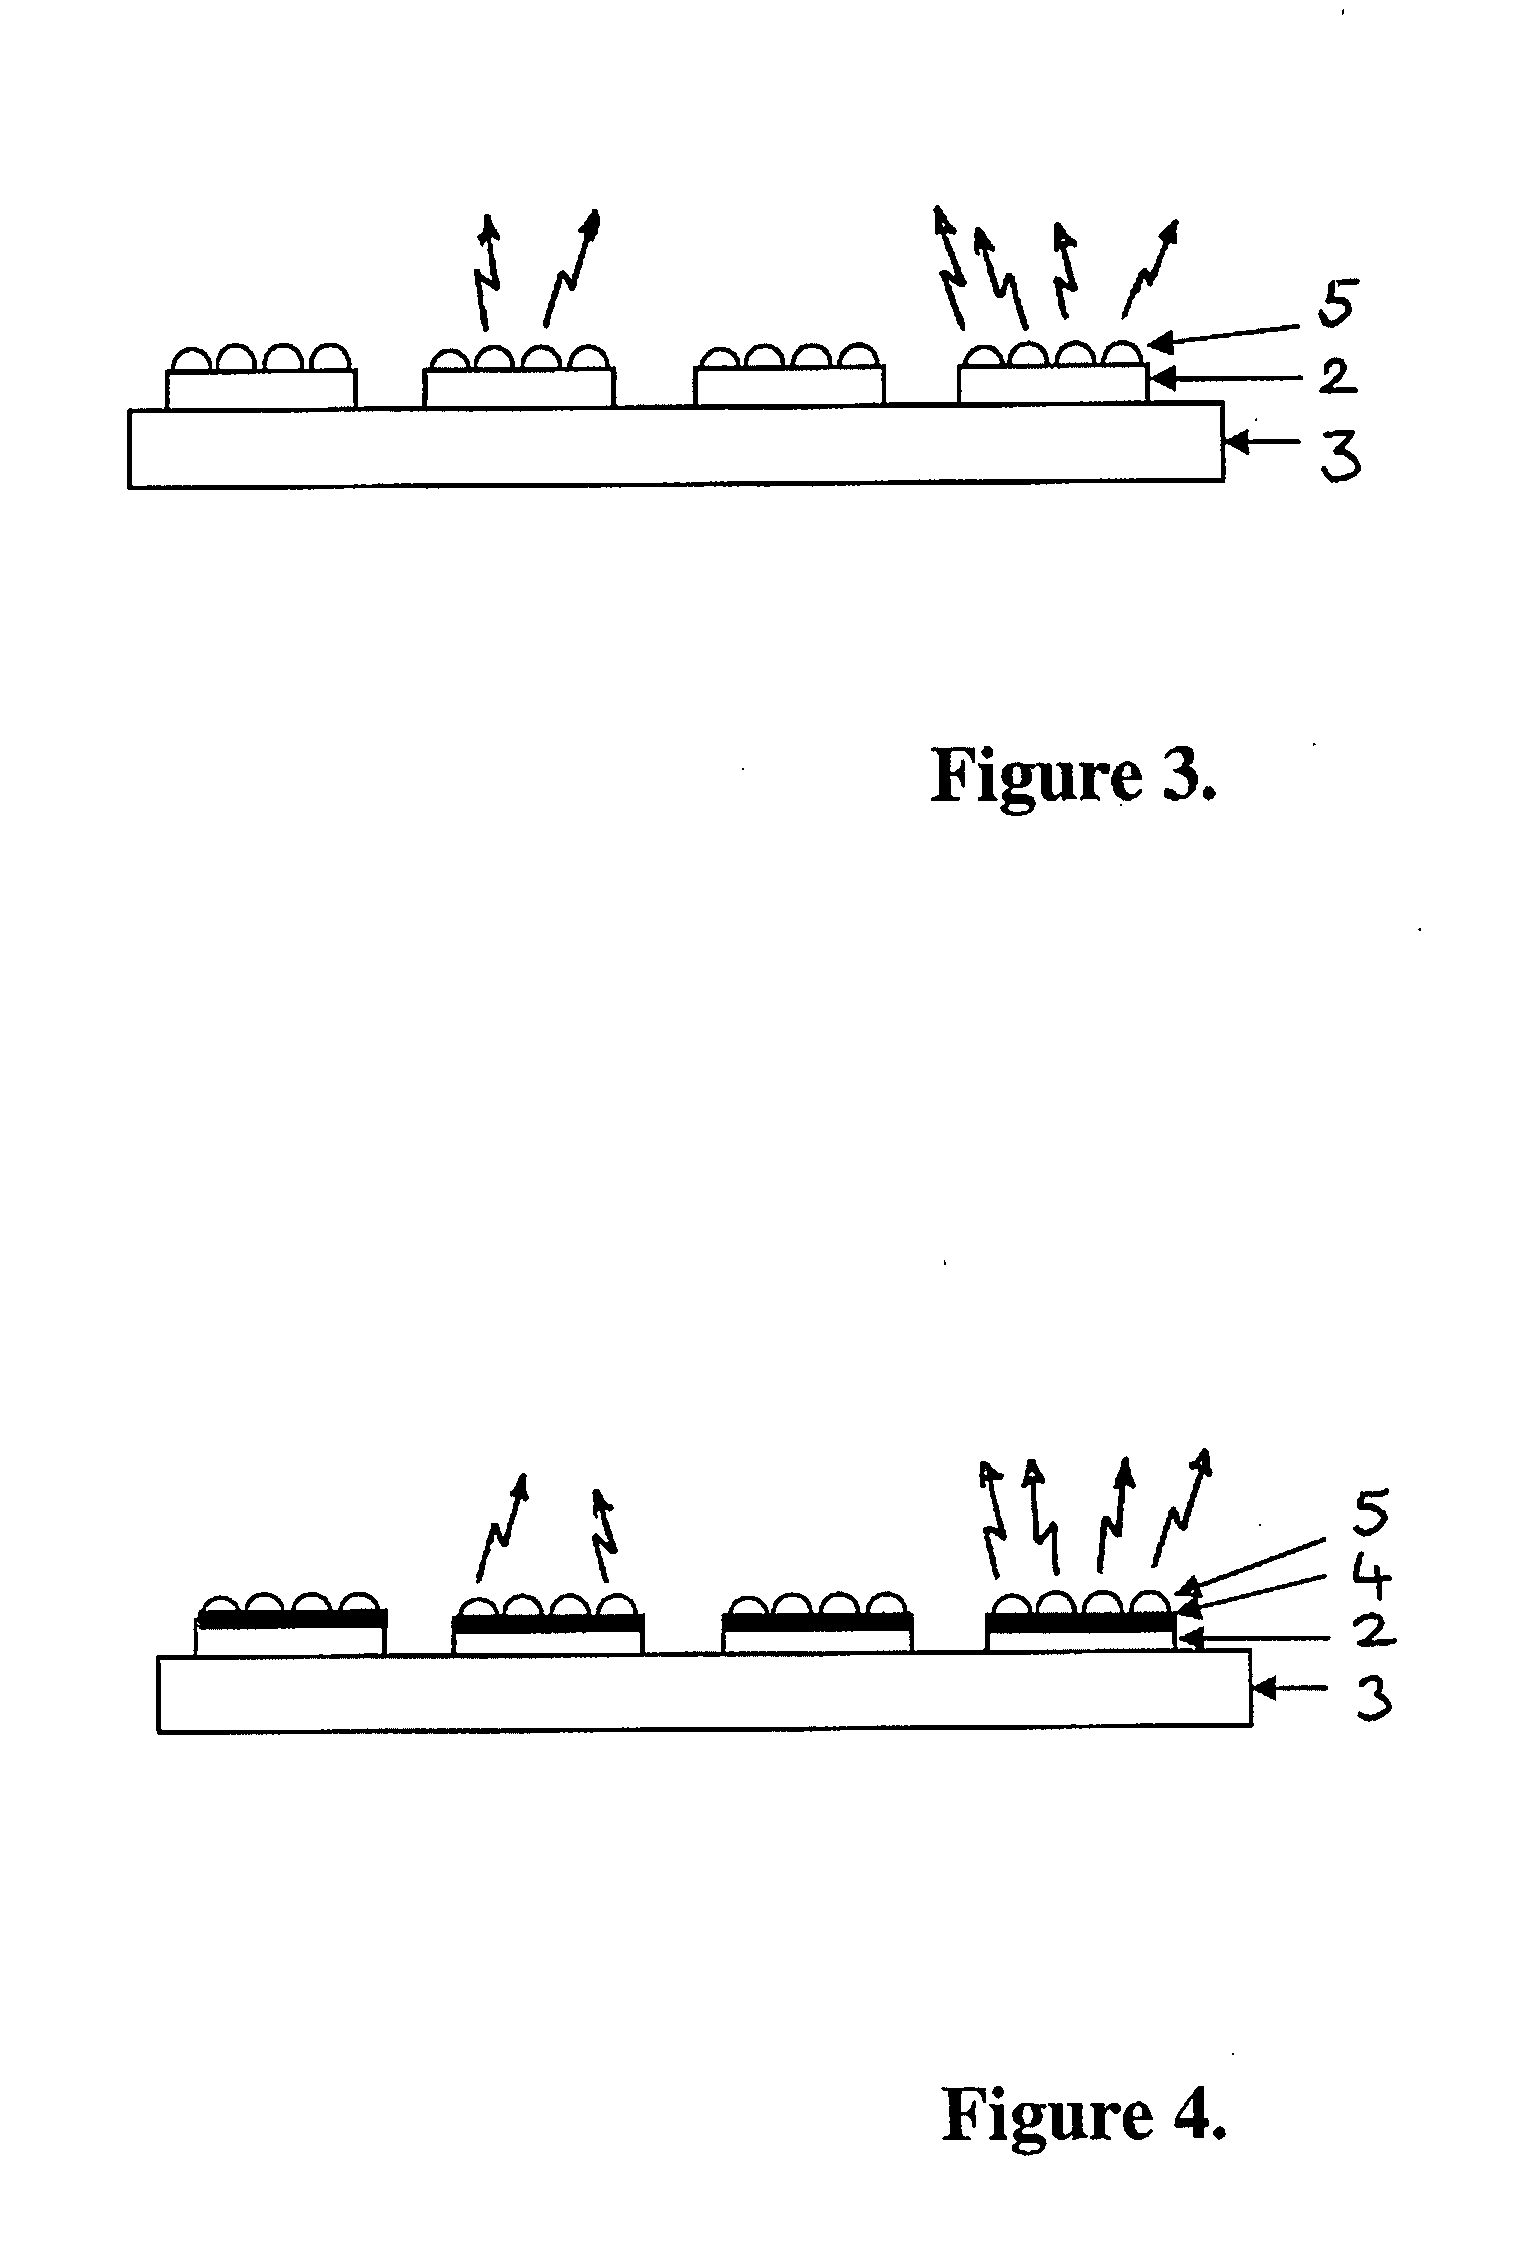 Light emitting diode assembly and method of fabrication